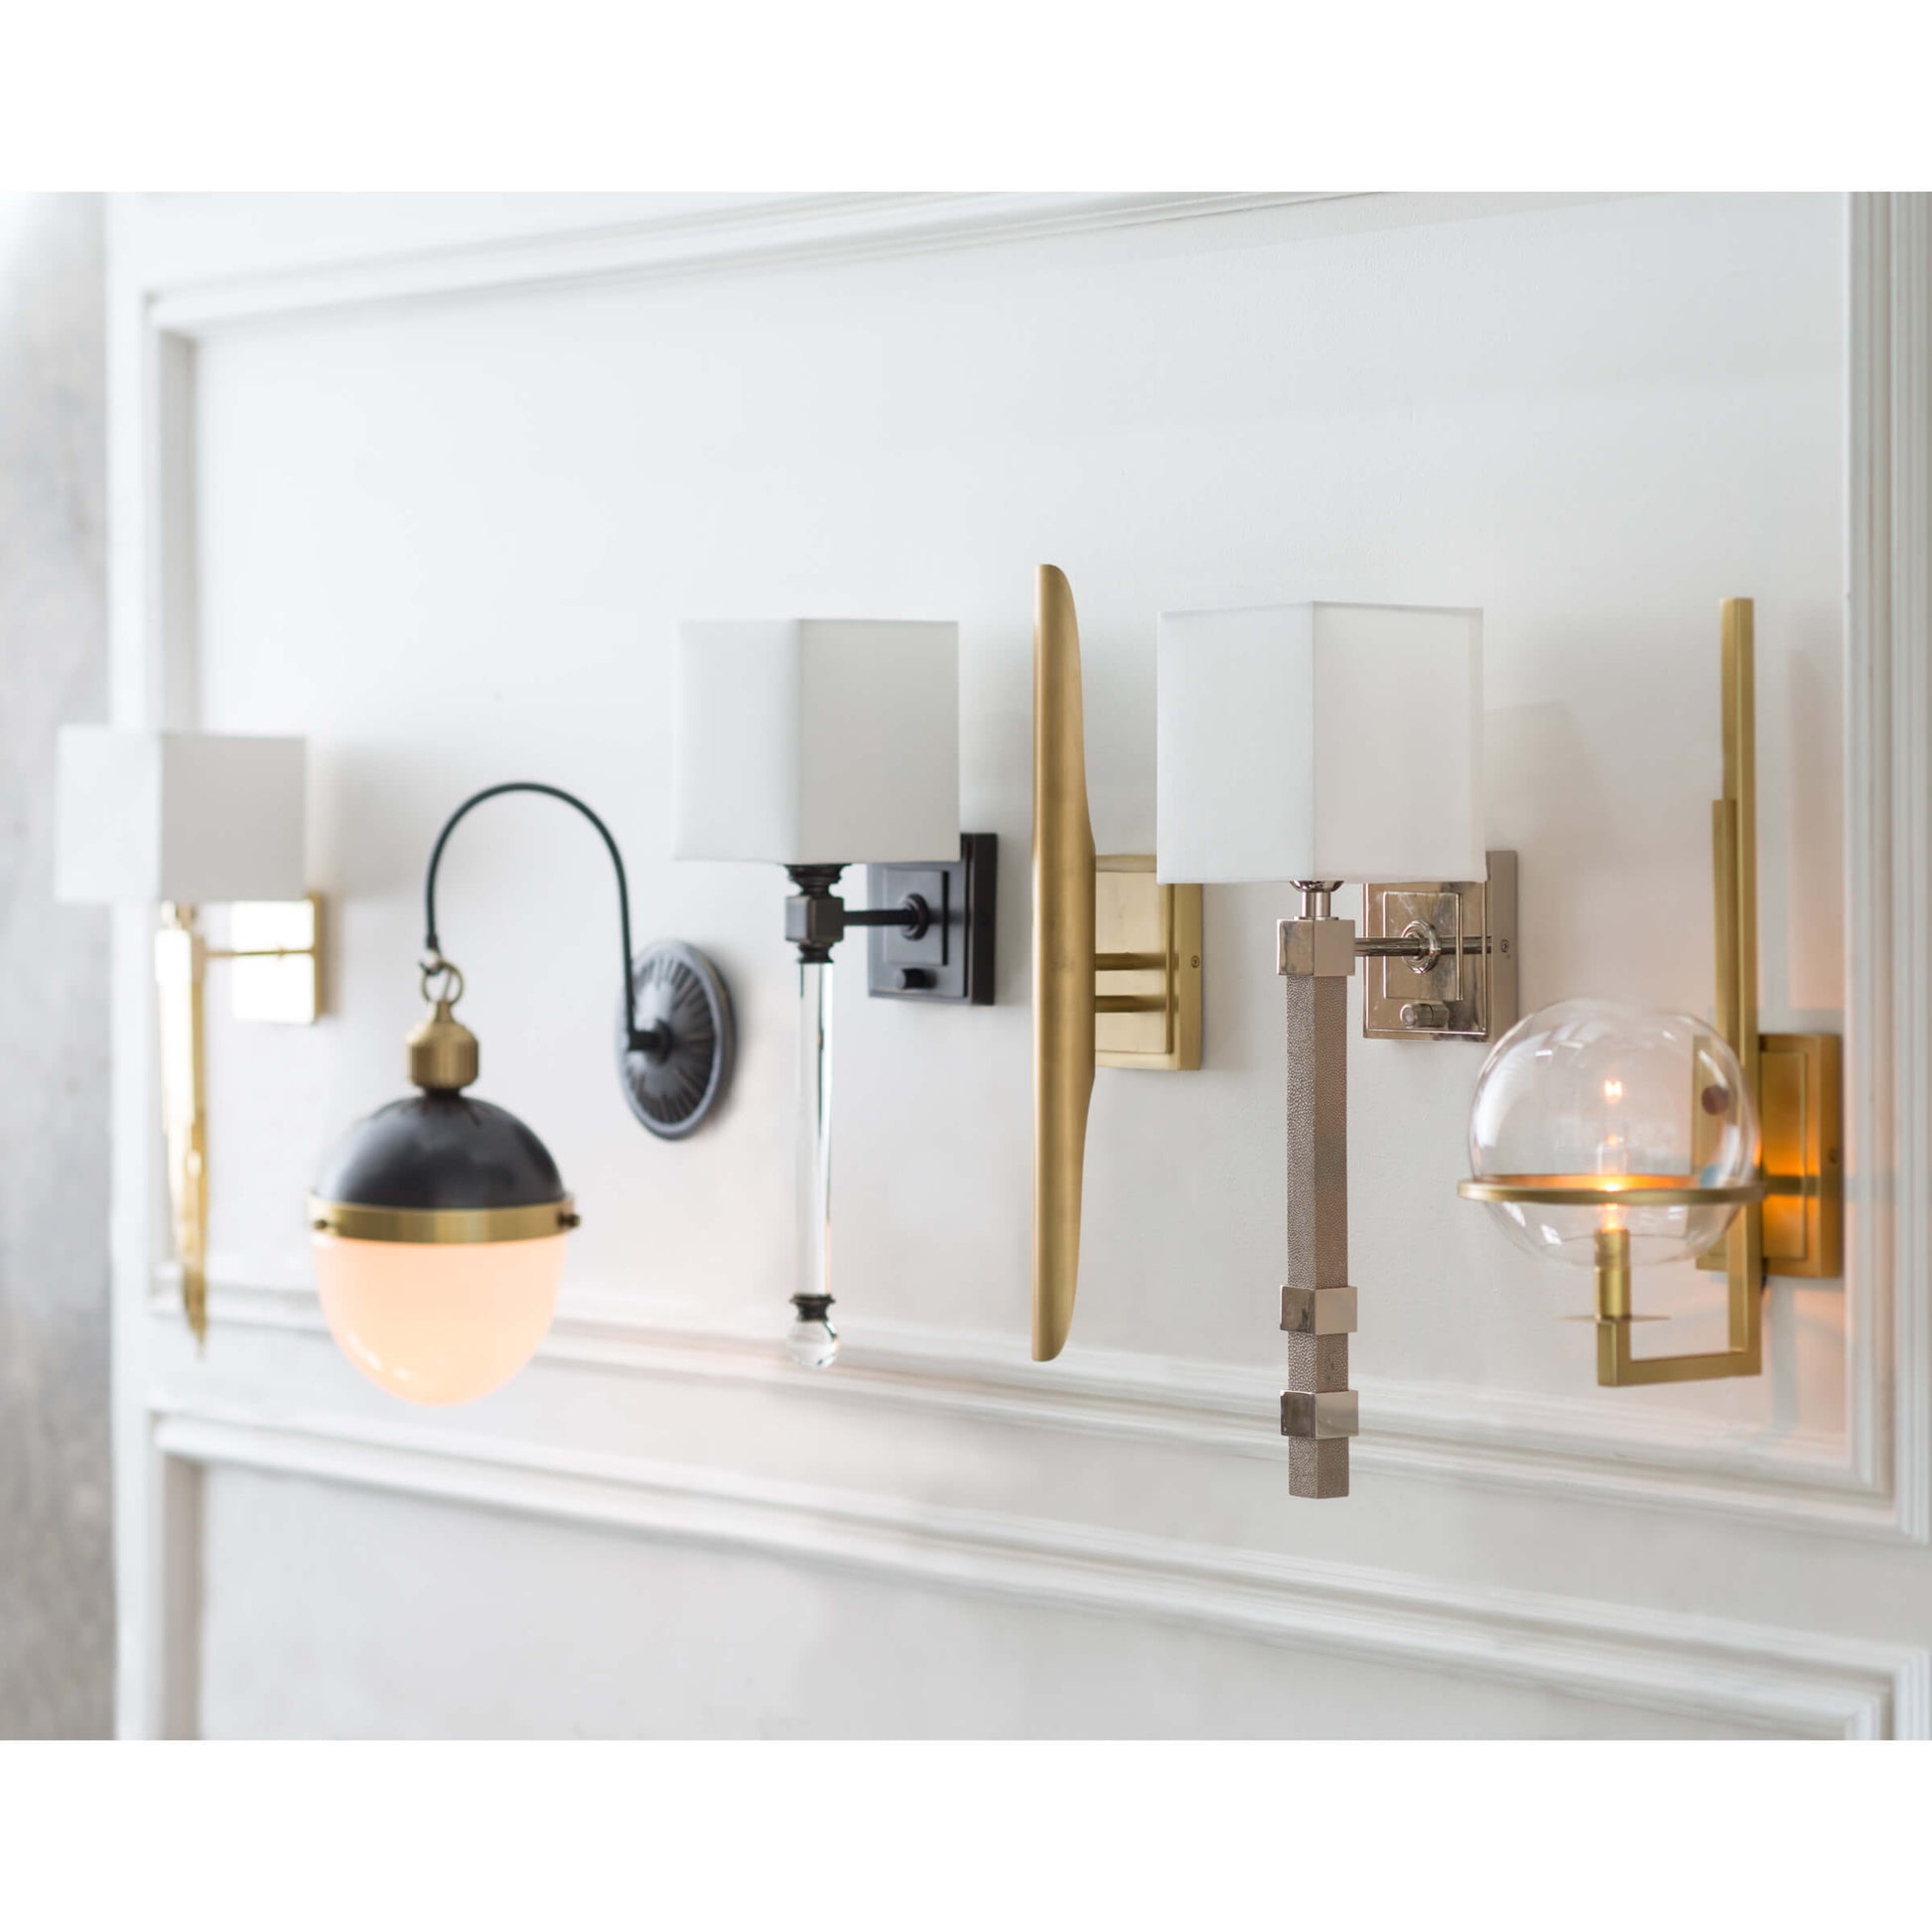 Otis Sconce in Blackened Brass and Natural Brass by Regina Andrew